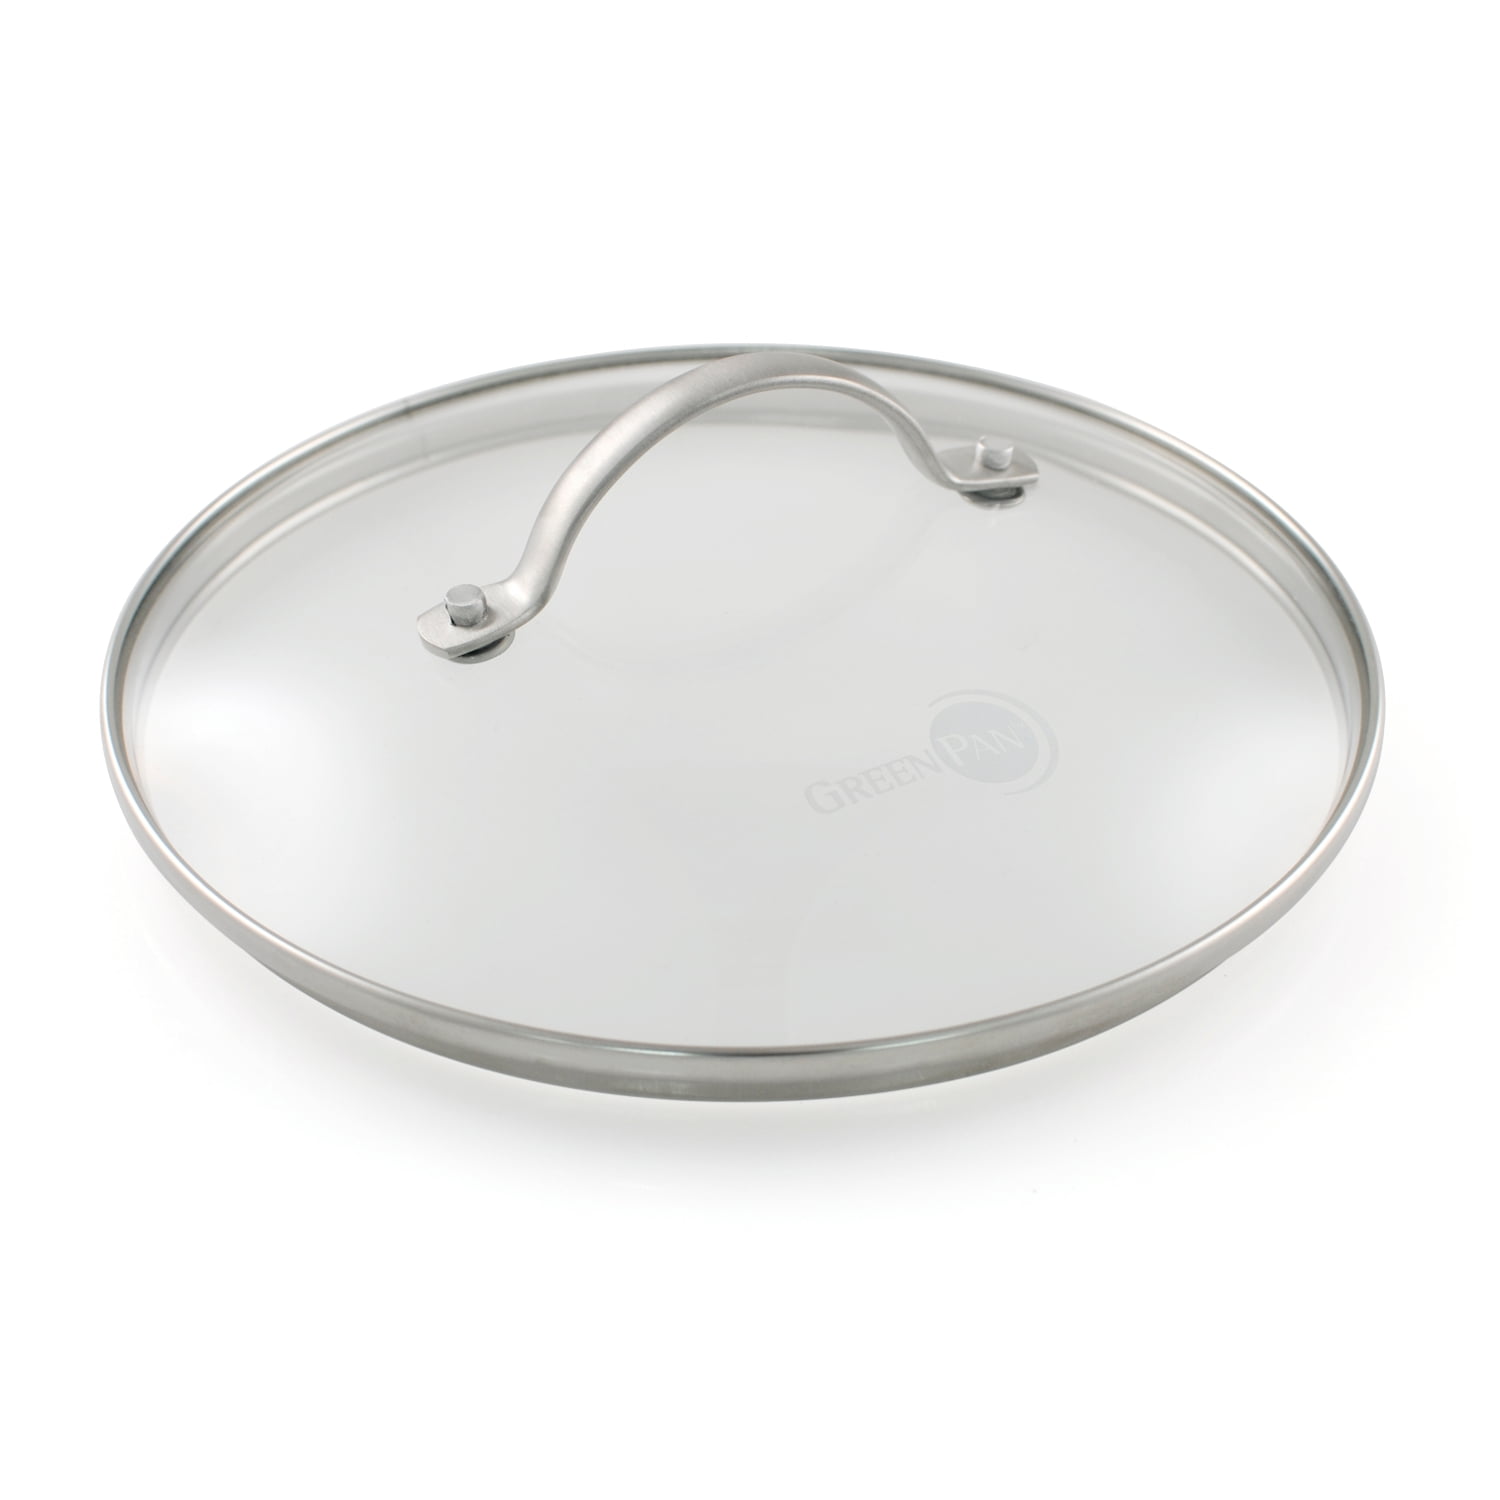 Green Pan 12 Inch Glass Lid with Stainless Steel Handle